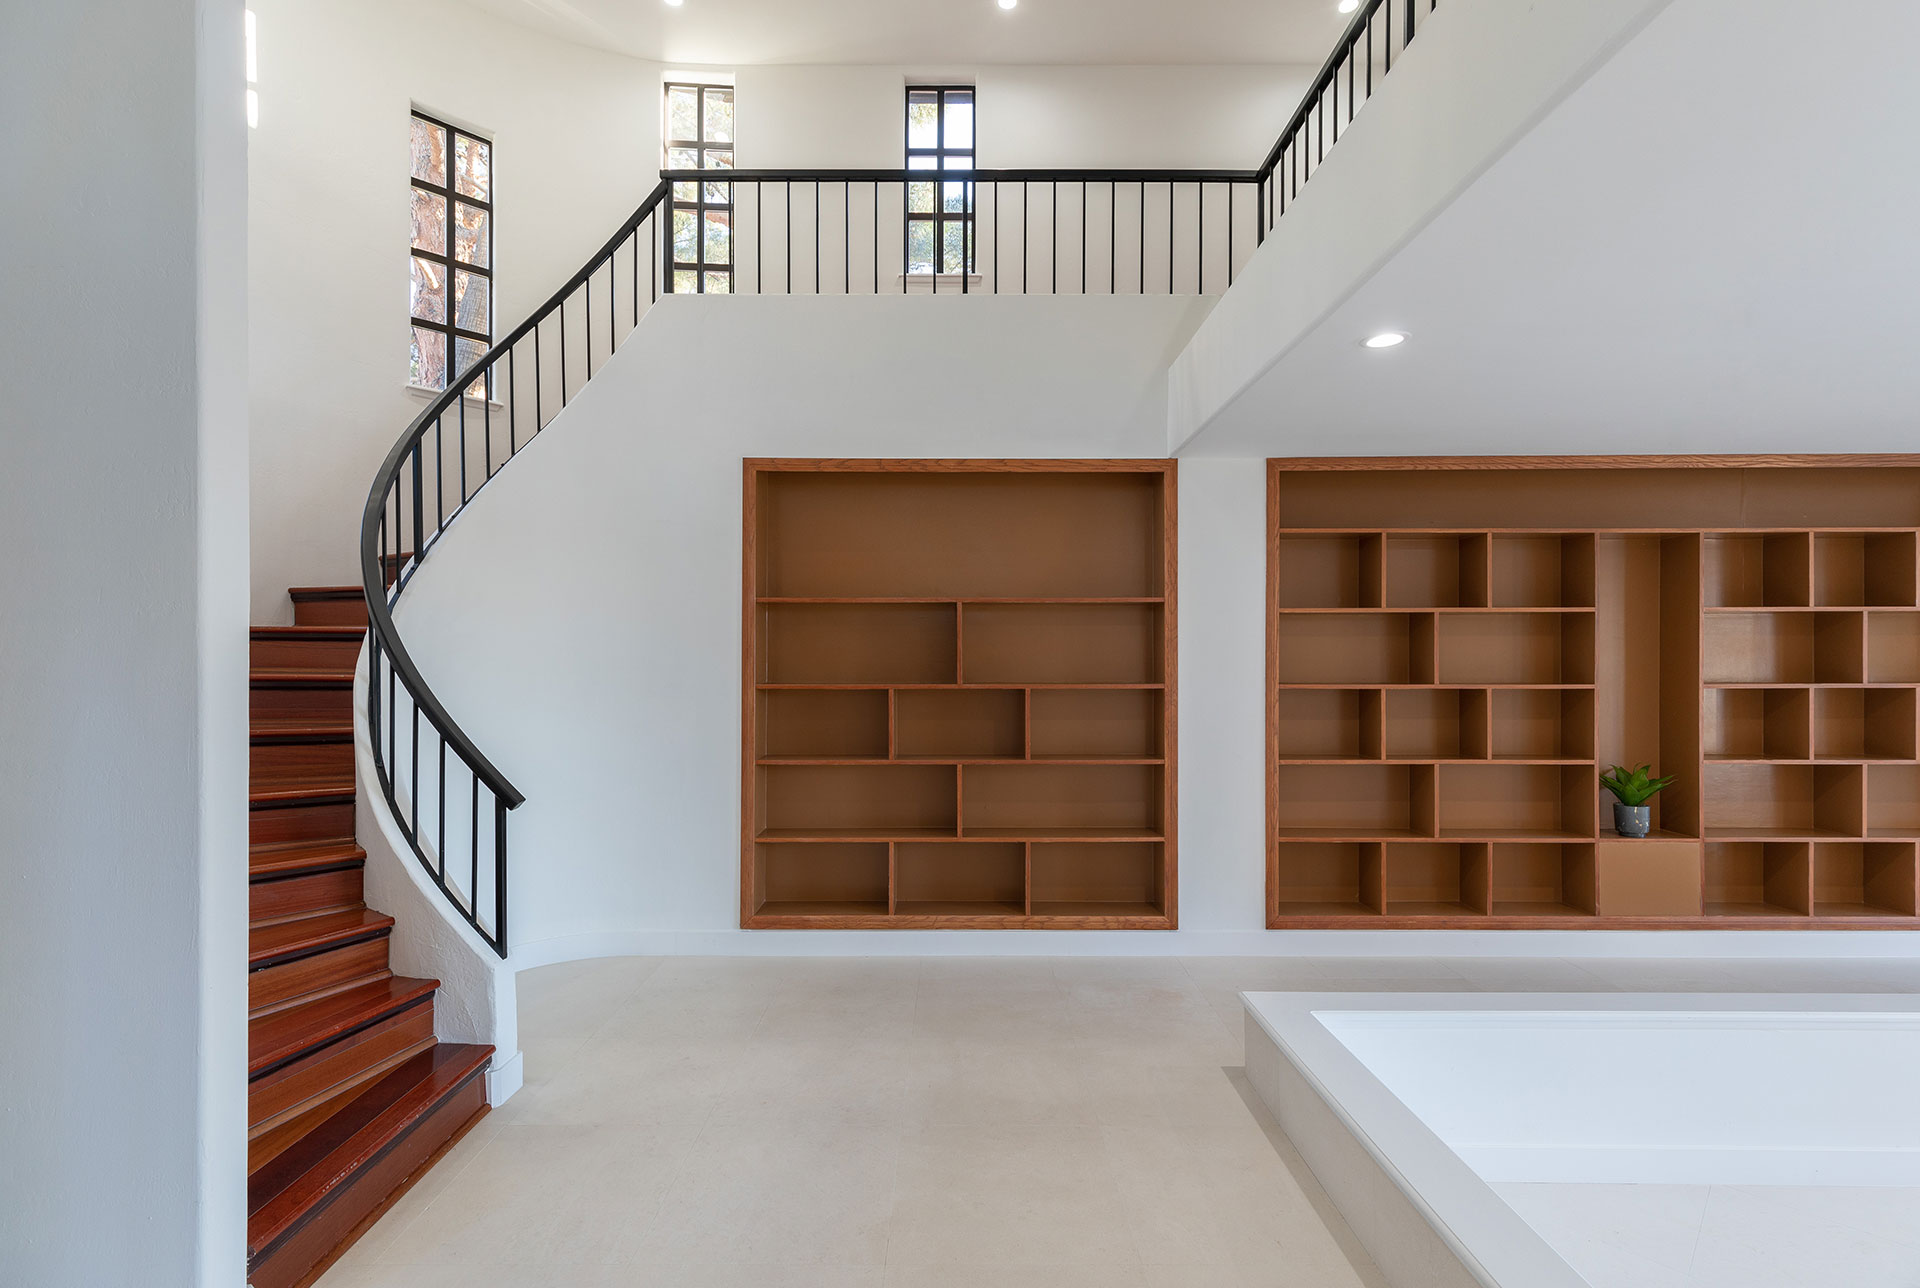 A white room with a brown built-in bookshelf with a spiral staircase wrapping around in with black railings.